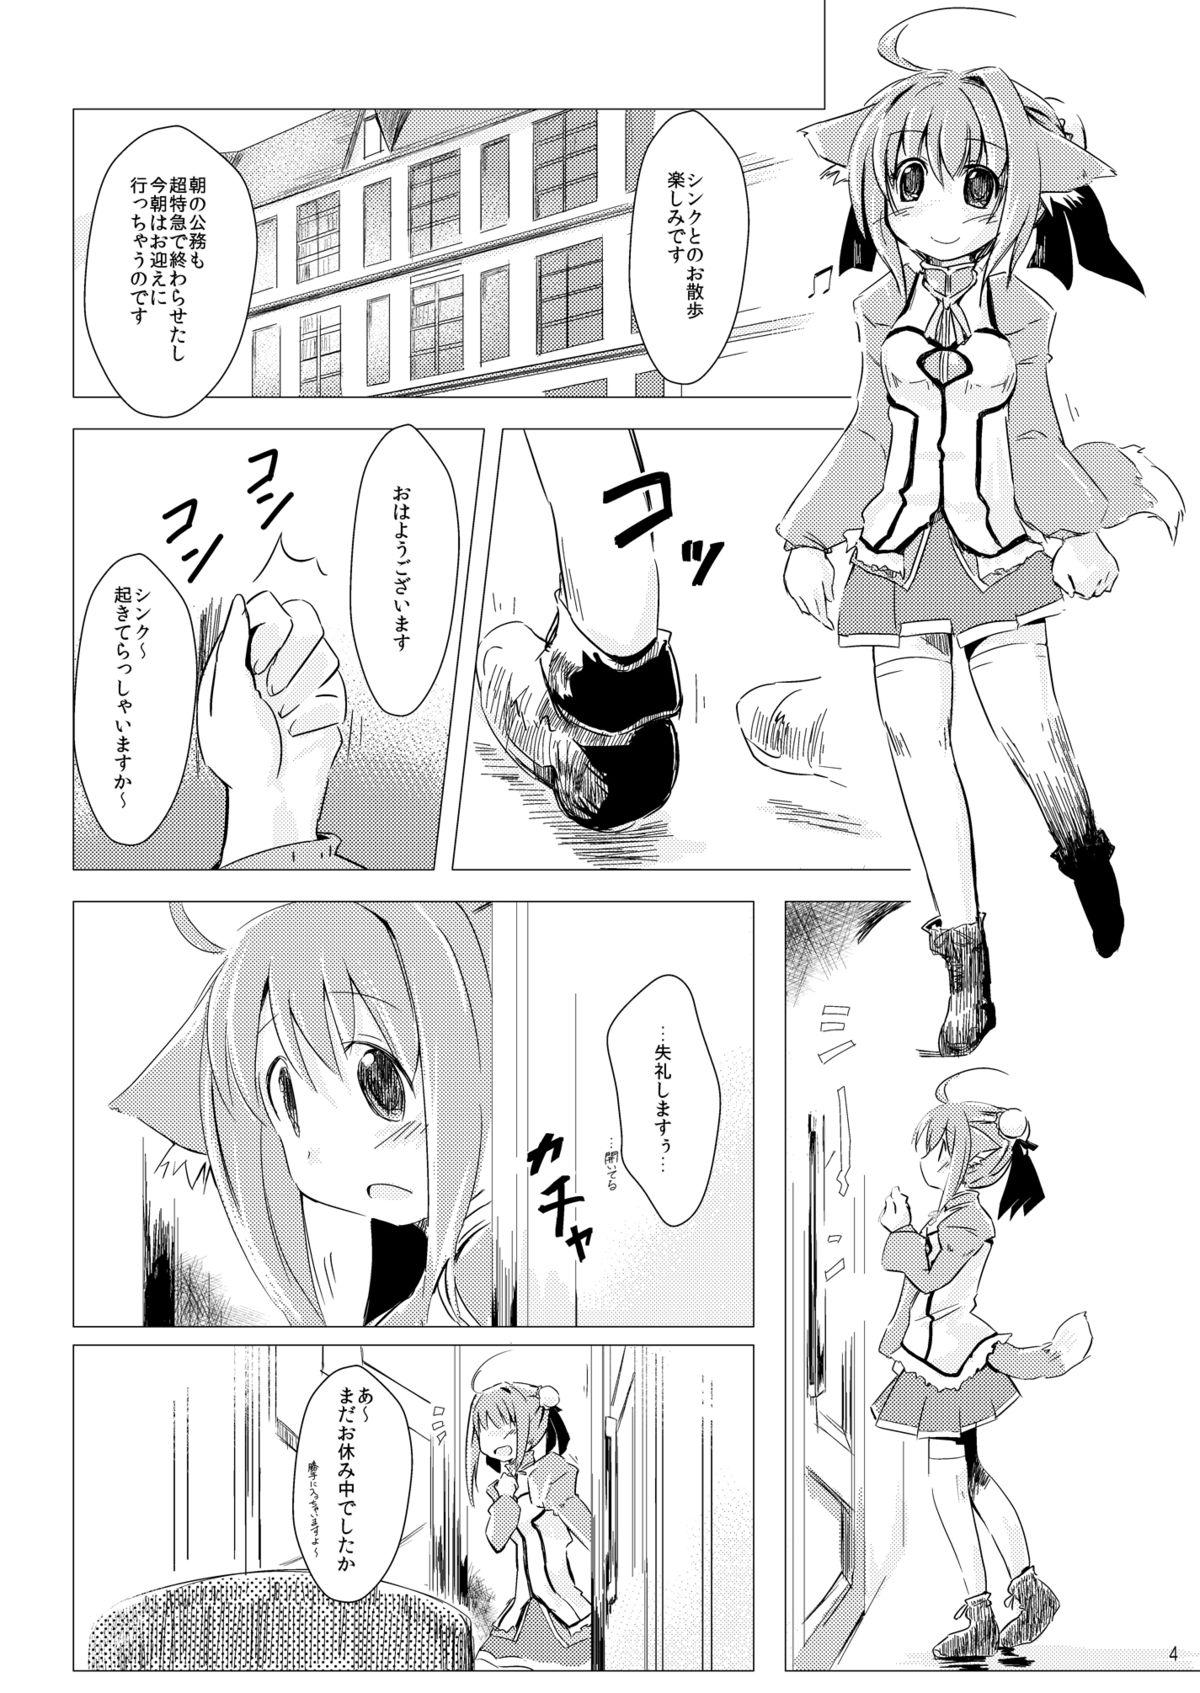 Love Making Millhi no Asa no Undou - Millhiore's Morning Business - Dog days Hermosa - Page 4